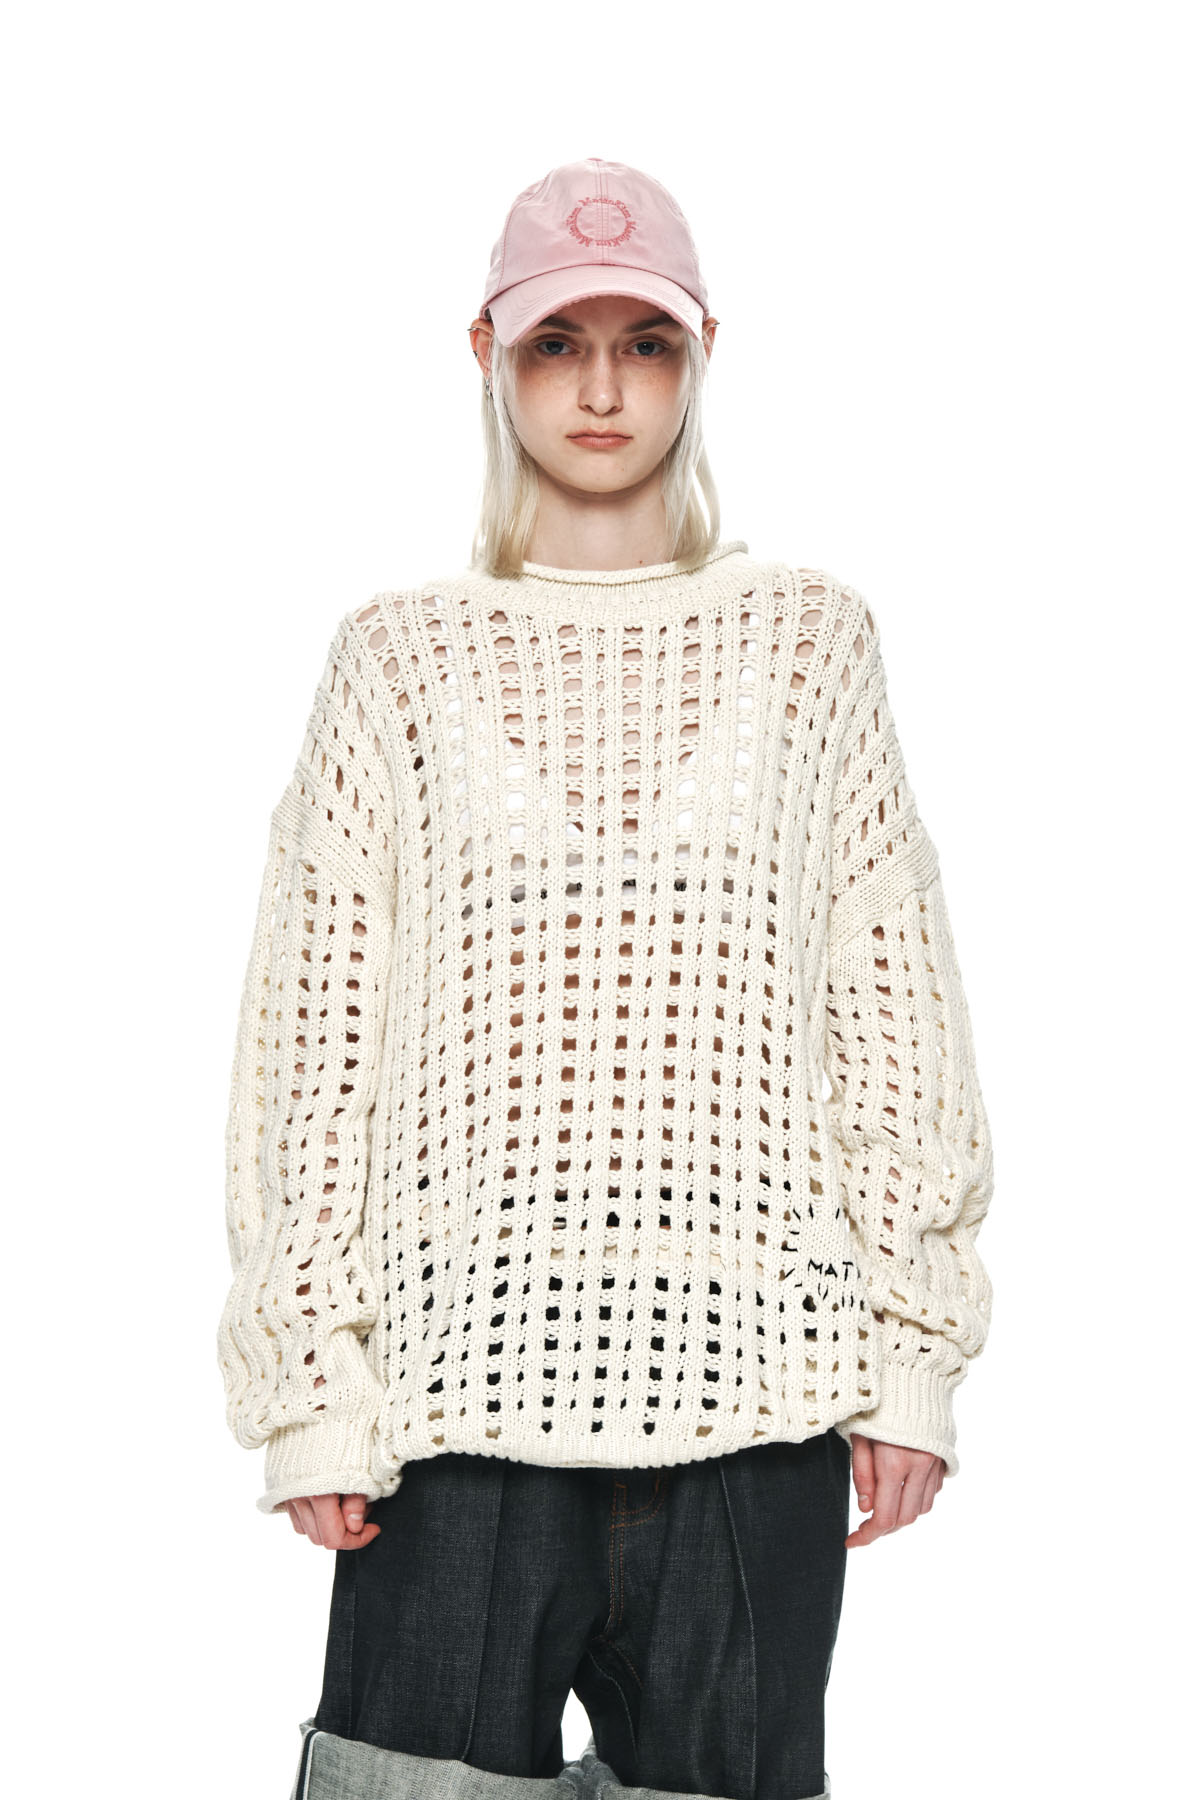 HAND KNITTED CROCHET PULLOVER IN IVORY